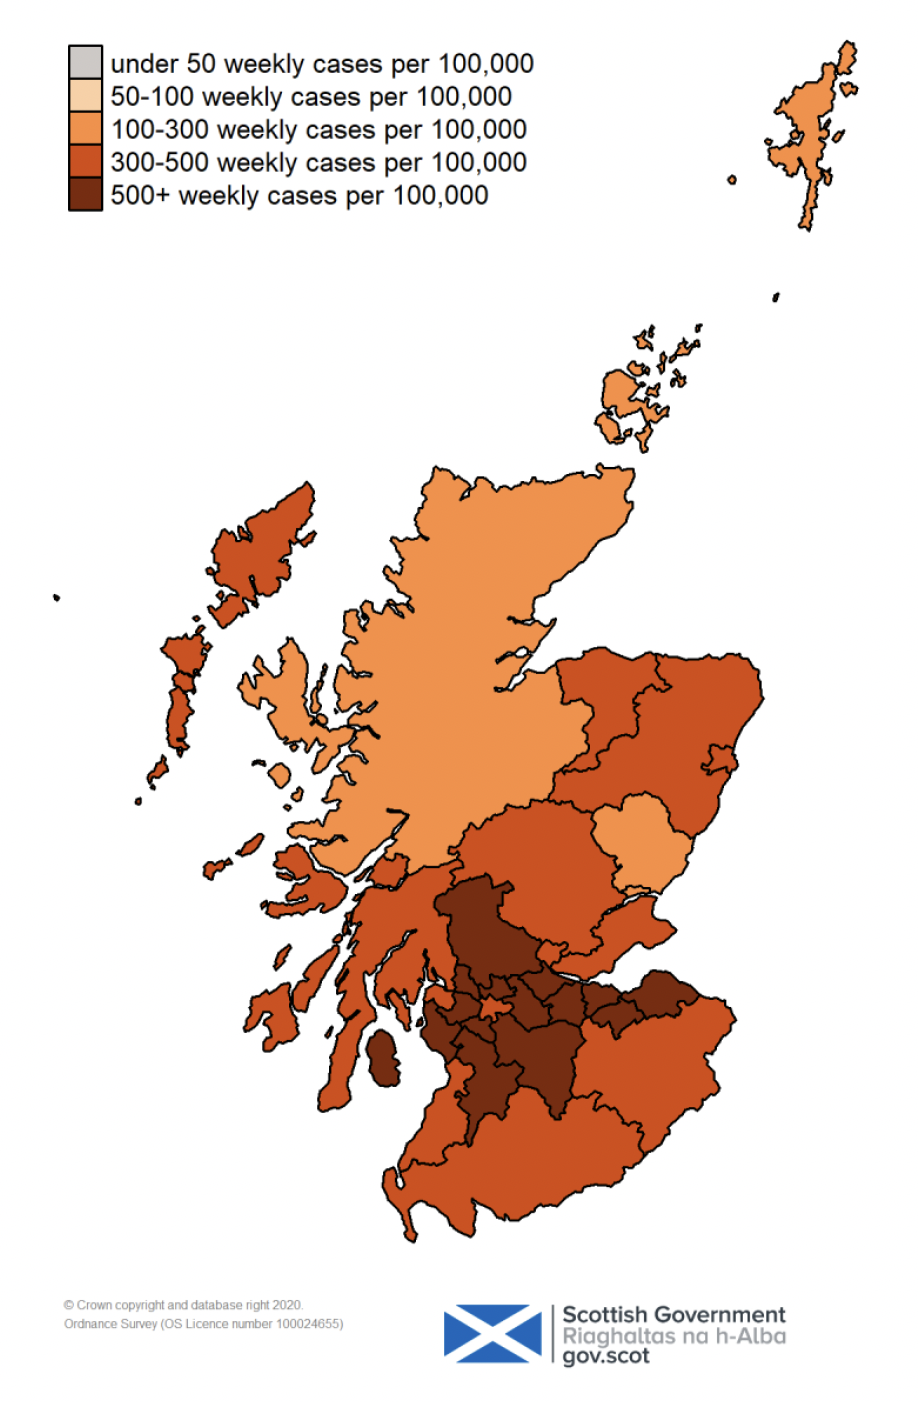 This colour coded map of Scotland shows the different rates of weekly positive cases per 100,000 people across Scotland’s Local Authorities. The colours range from grey for under 50 weekly cases per 100,000, through very light orange for 50 to 100, orange for 100-300, darker orange for 300-500, and very dark orange for over 500 weekly cases per 100,000 people. 
No local authorities are showing as grey for under 50 weekly cases per 100,000 and no local authorities are shown as very light orange, with 50-100 weekly cases per 100,000 people. Orkney Islands, Shetland Islands, Angus, Highland and Dundee city are showing as orange with 100-300 weekly cases per 100,000 population. West Lothian, Falkirk, East Renfrewshire, East Dunbartonshire, East Ayrshire, South Lanarkshire, Renfrewshire, North Ayrshire, North Lanarkshire, West Dunbartonshire, Midlothian, East Lothian, City of Edinburgh and Stirling are showing as very dark orange on the map this week, with over 500 weekly cases per 100,000. All other local authorities are showing as darker orange with 300-500 weekly cases per 100,000 population. 
